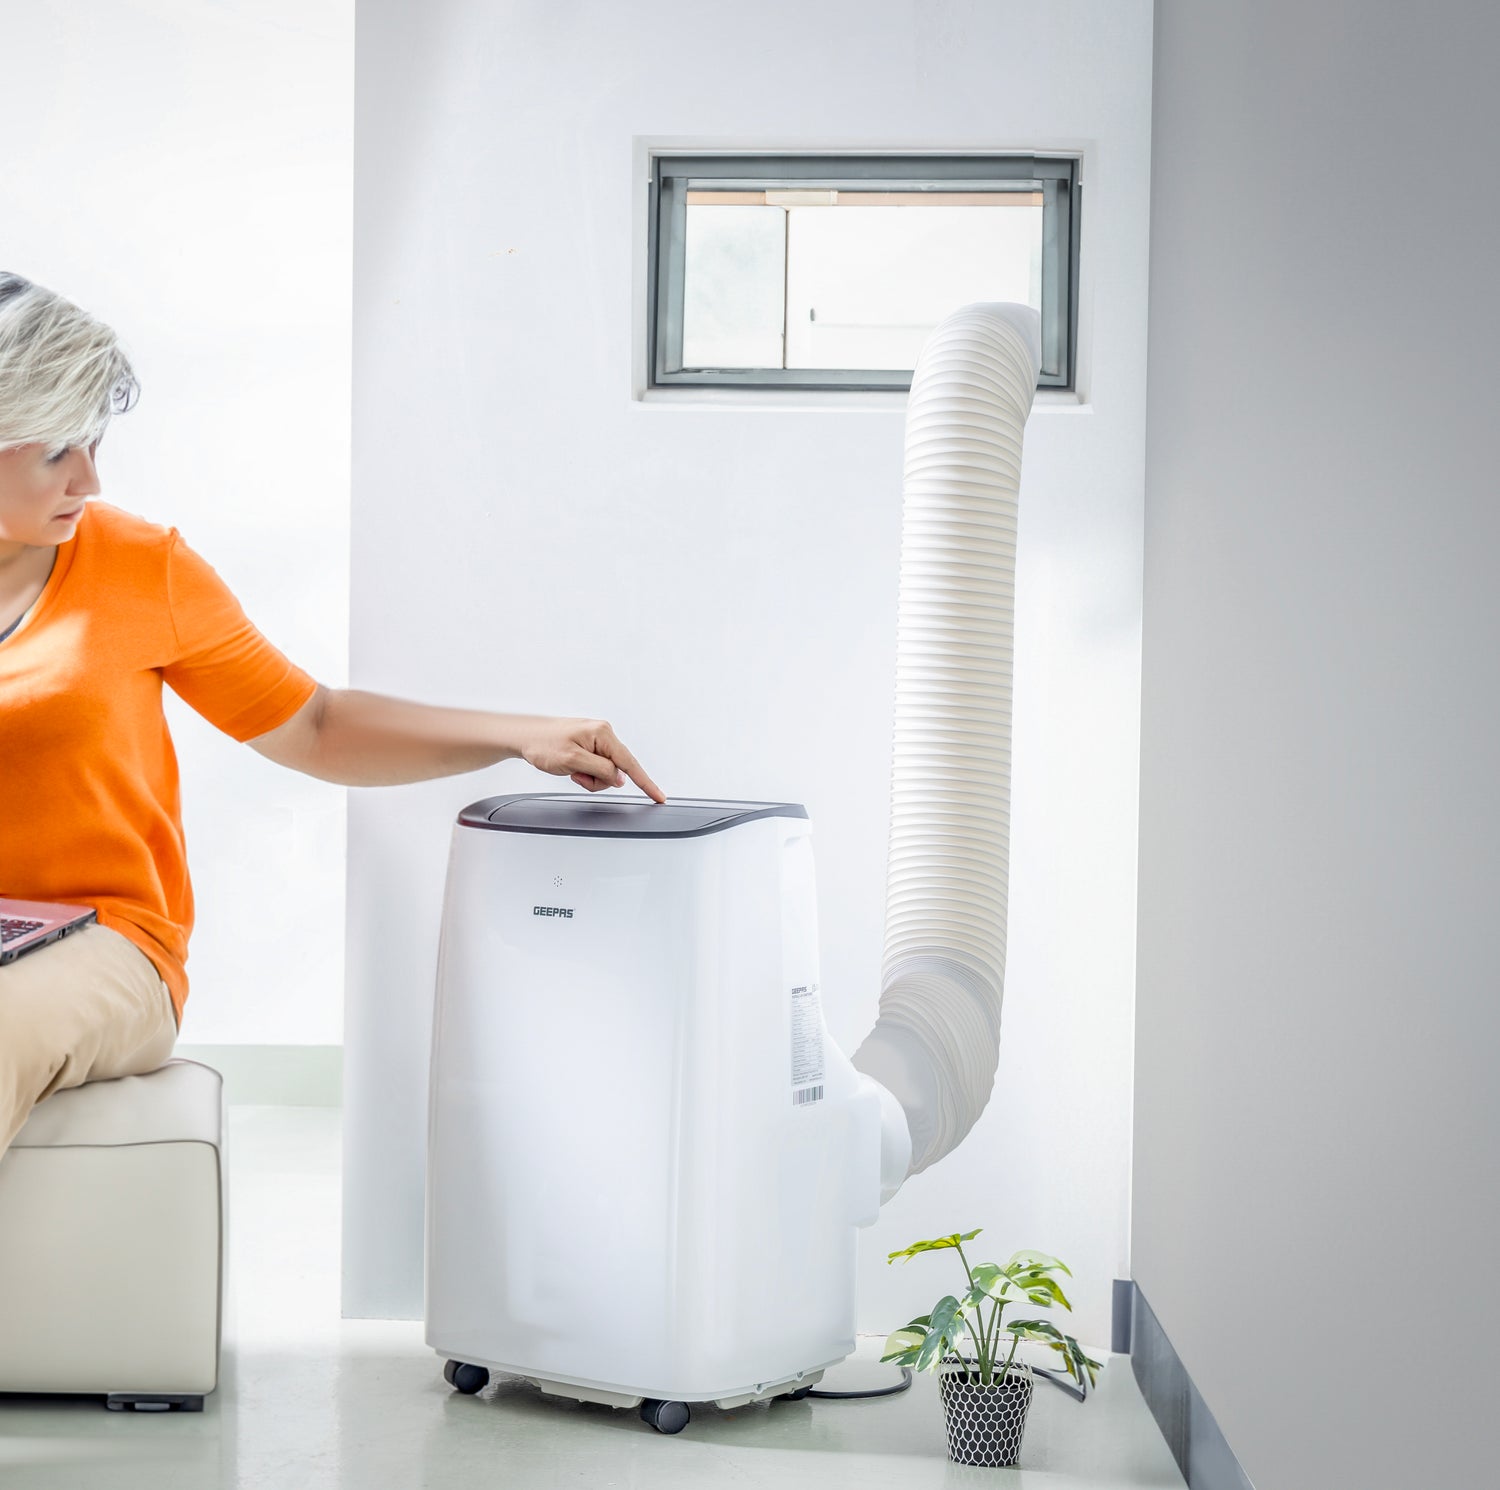 What Are The Benefits Of Portable Air Conditioning?